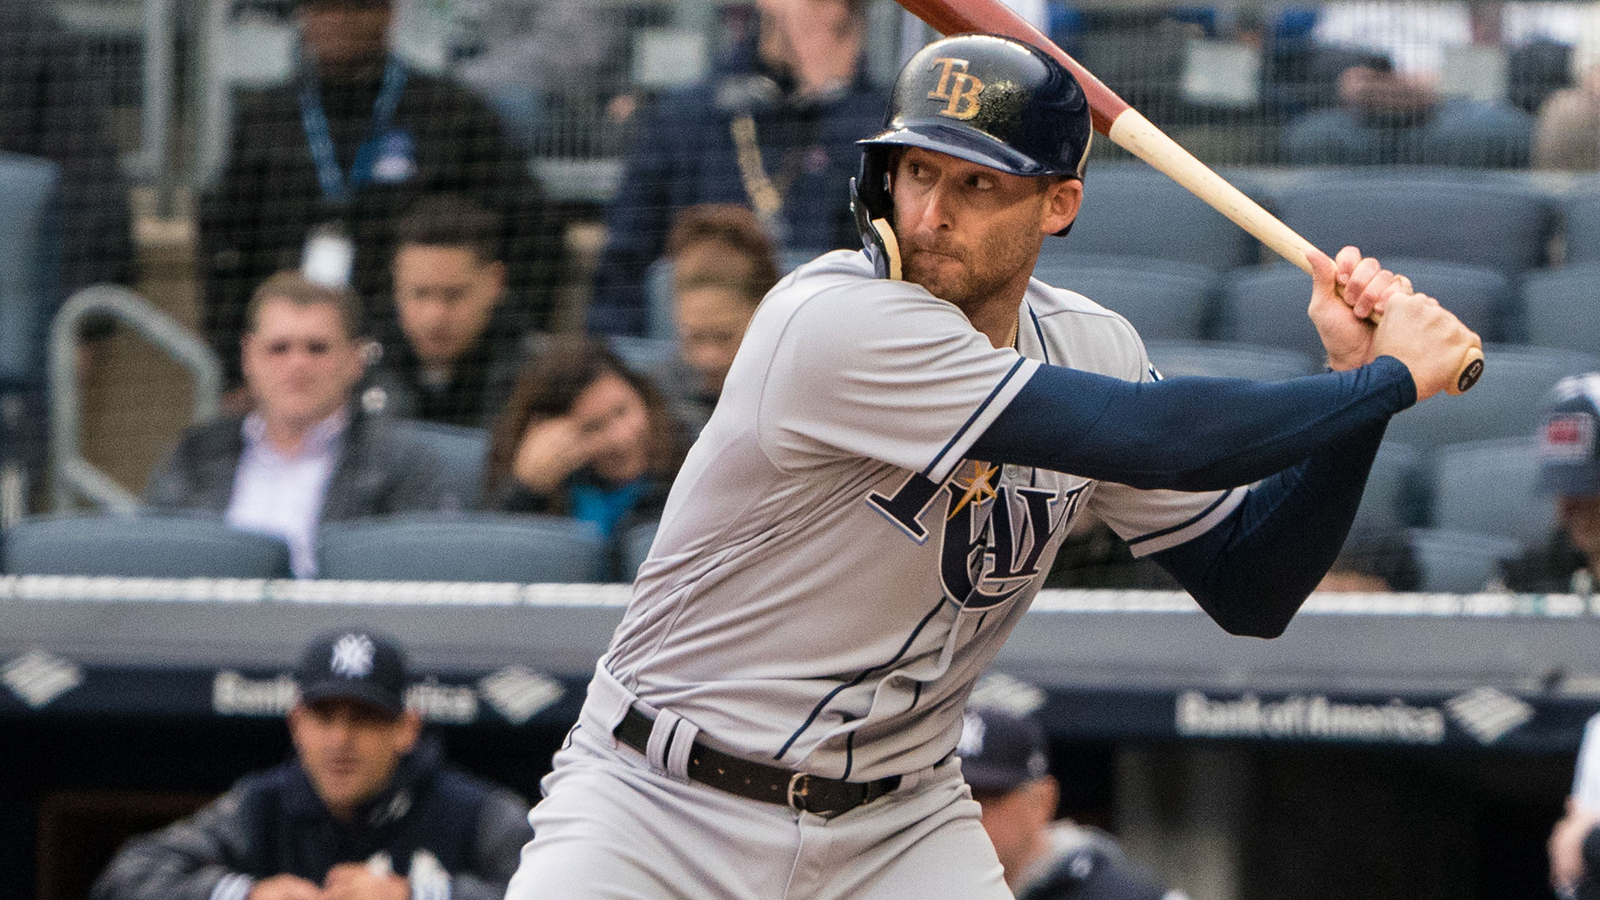 Rays place Brad Miller on 10-day DL, select RHP Ryan Weber's contract from Triple-A